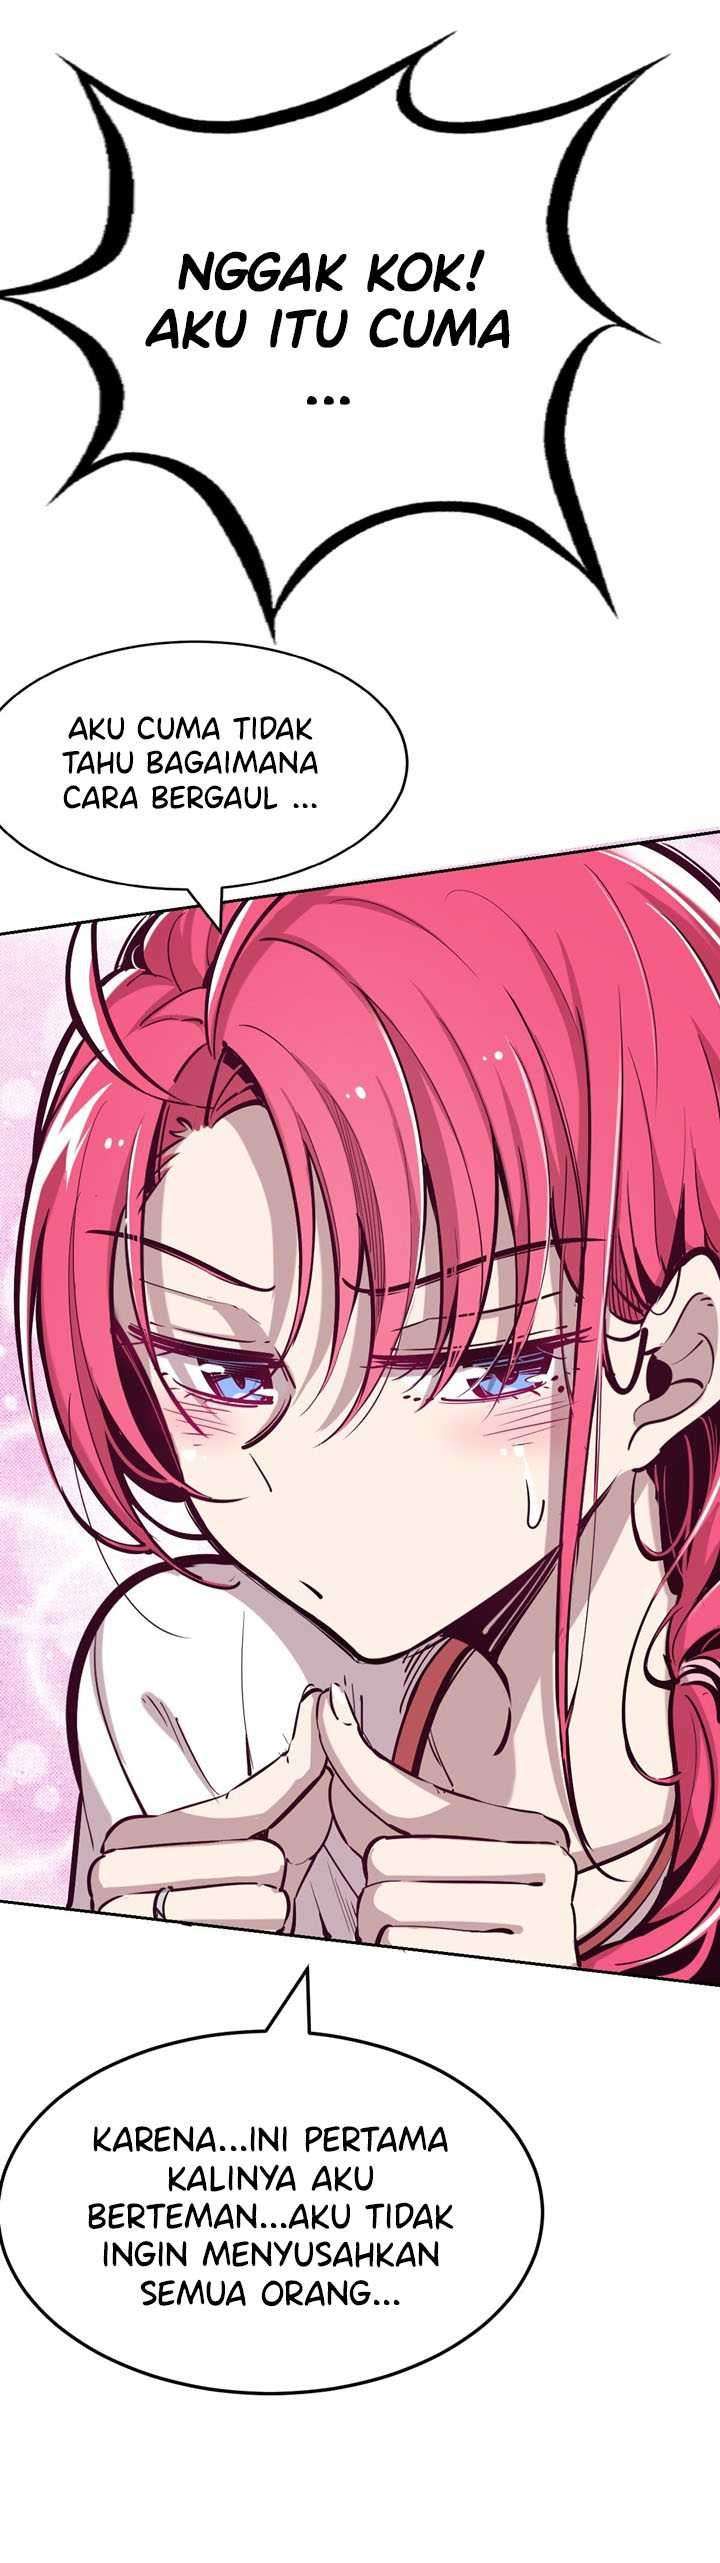 Demon X Angel, Can’t Get Along! Chapter 20